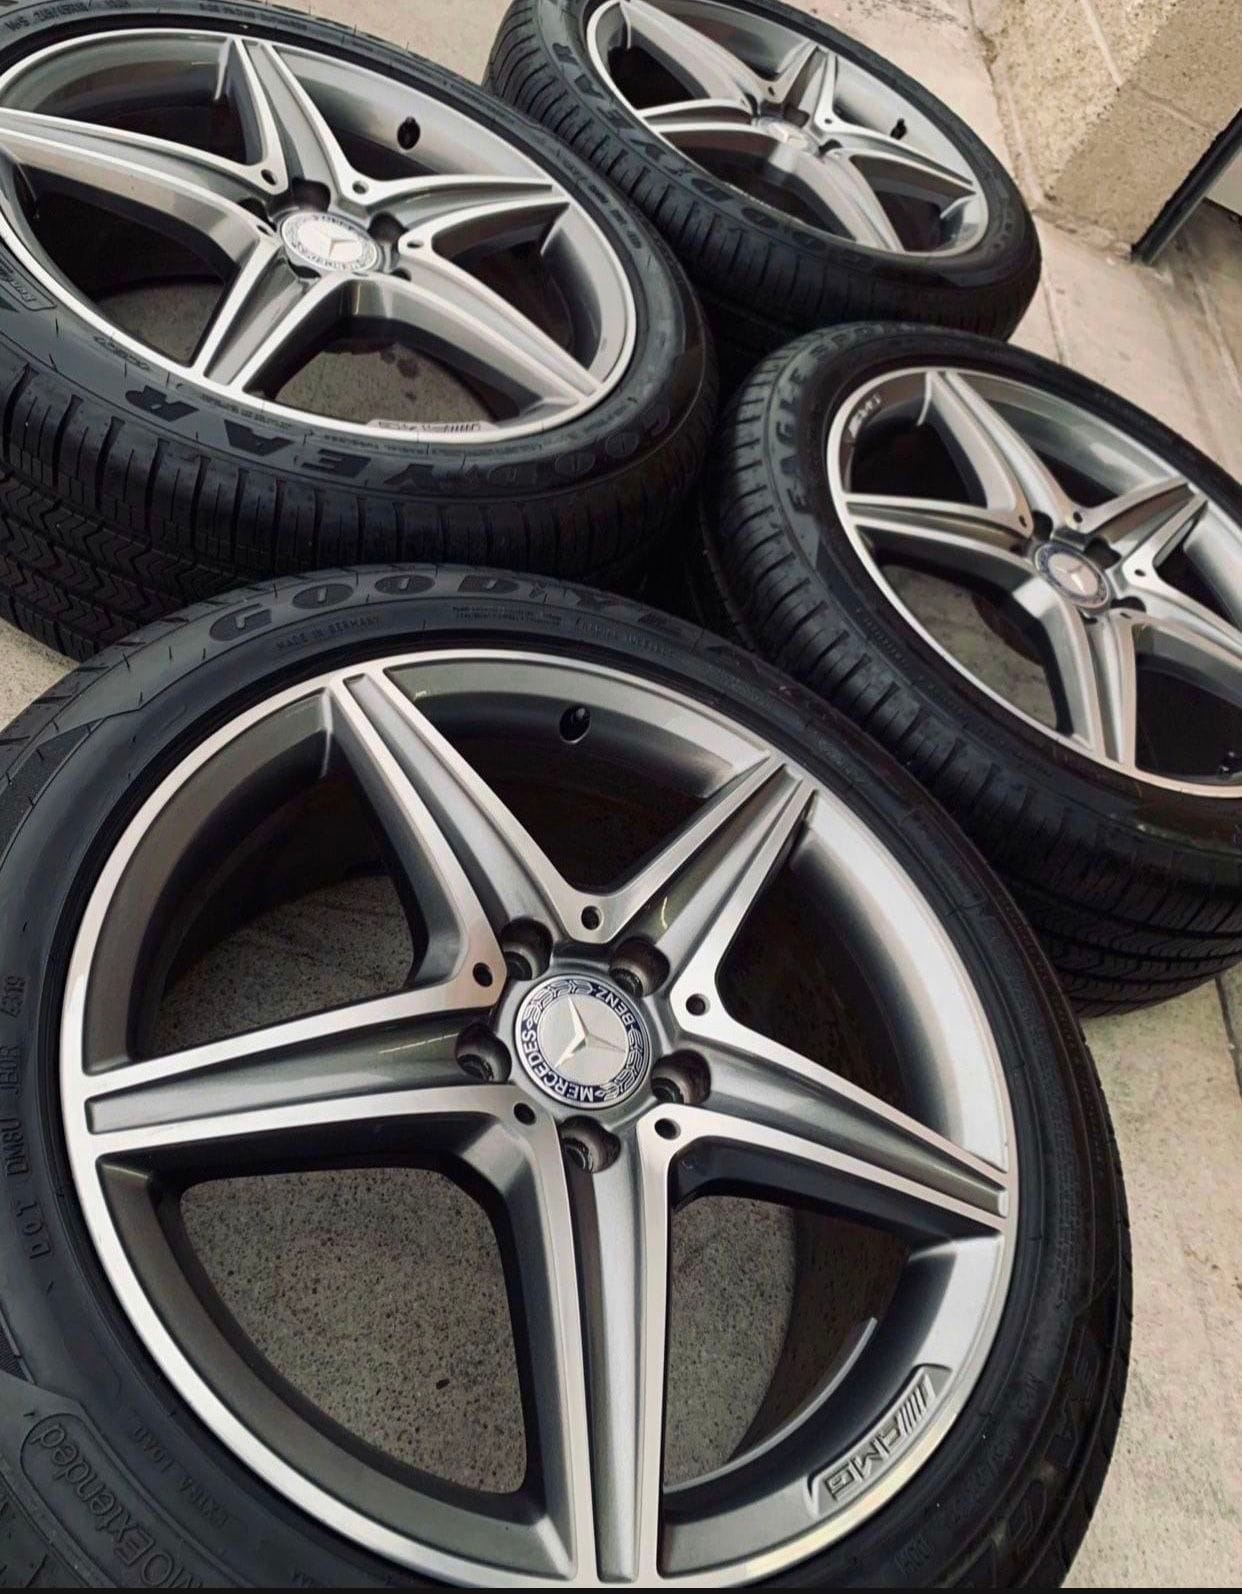 Wheels and Tires/Axles - W213 E300 8x18 Sport Package 5 Spoke AMG Wheels with GoodYear Eagle F1 Runflat Tires - Used - 2017 to 2021 Mercedes-Benz E300 - Beverly Hills, CA 90210, United States